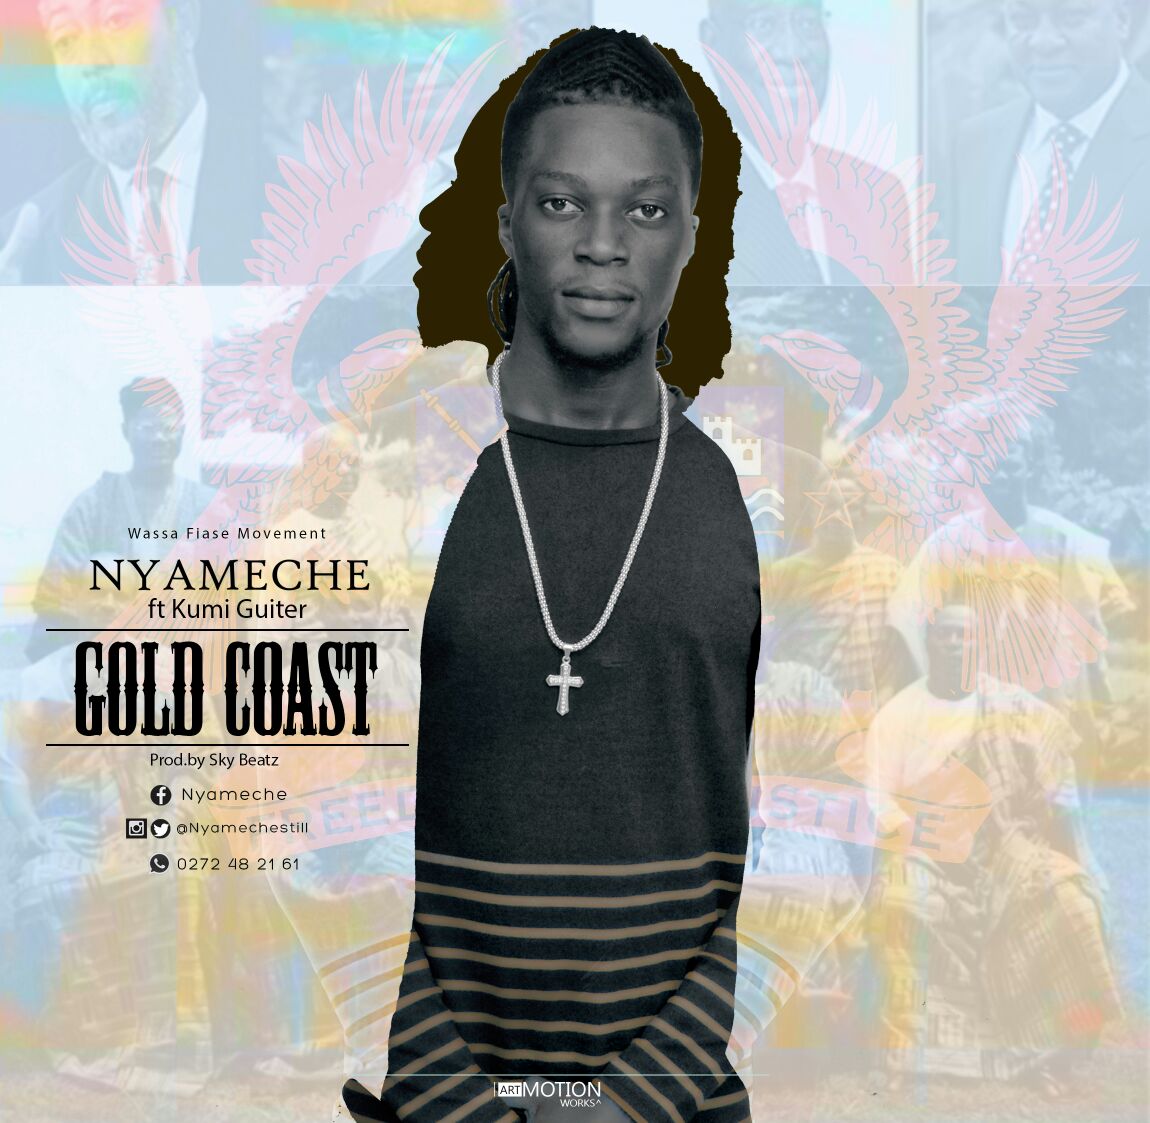 Nyameche Takes Ghanaians Back in His New Single ‘Gold Coast’.